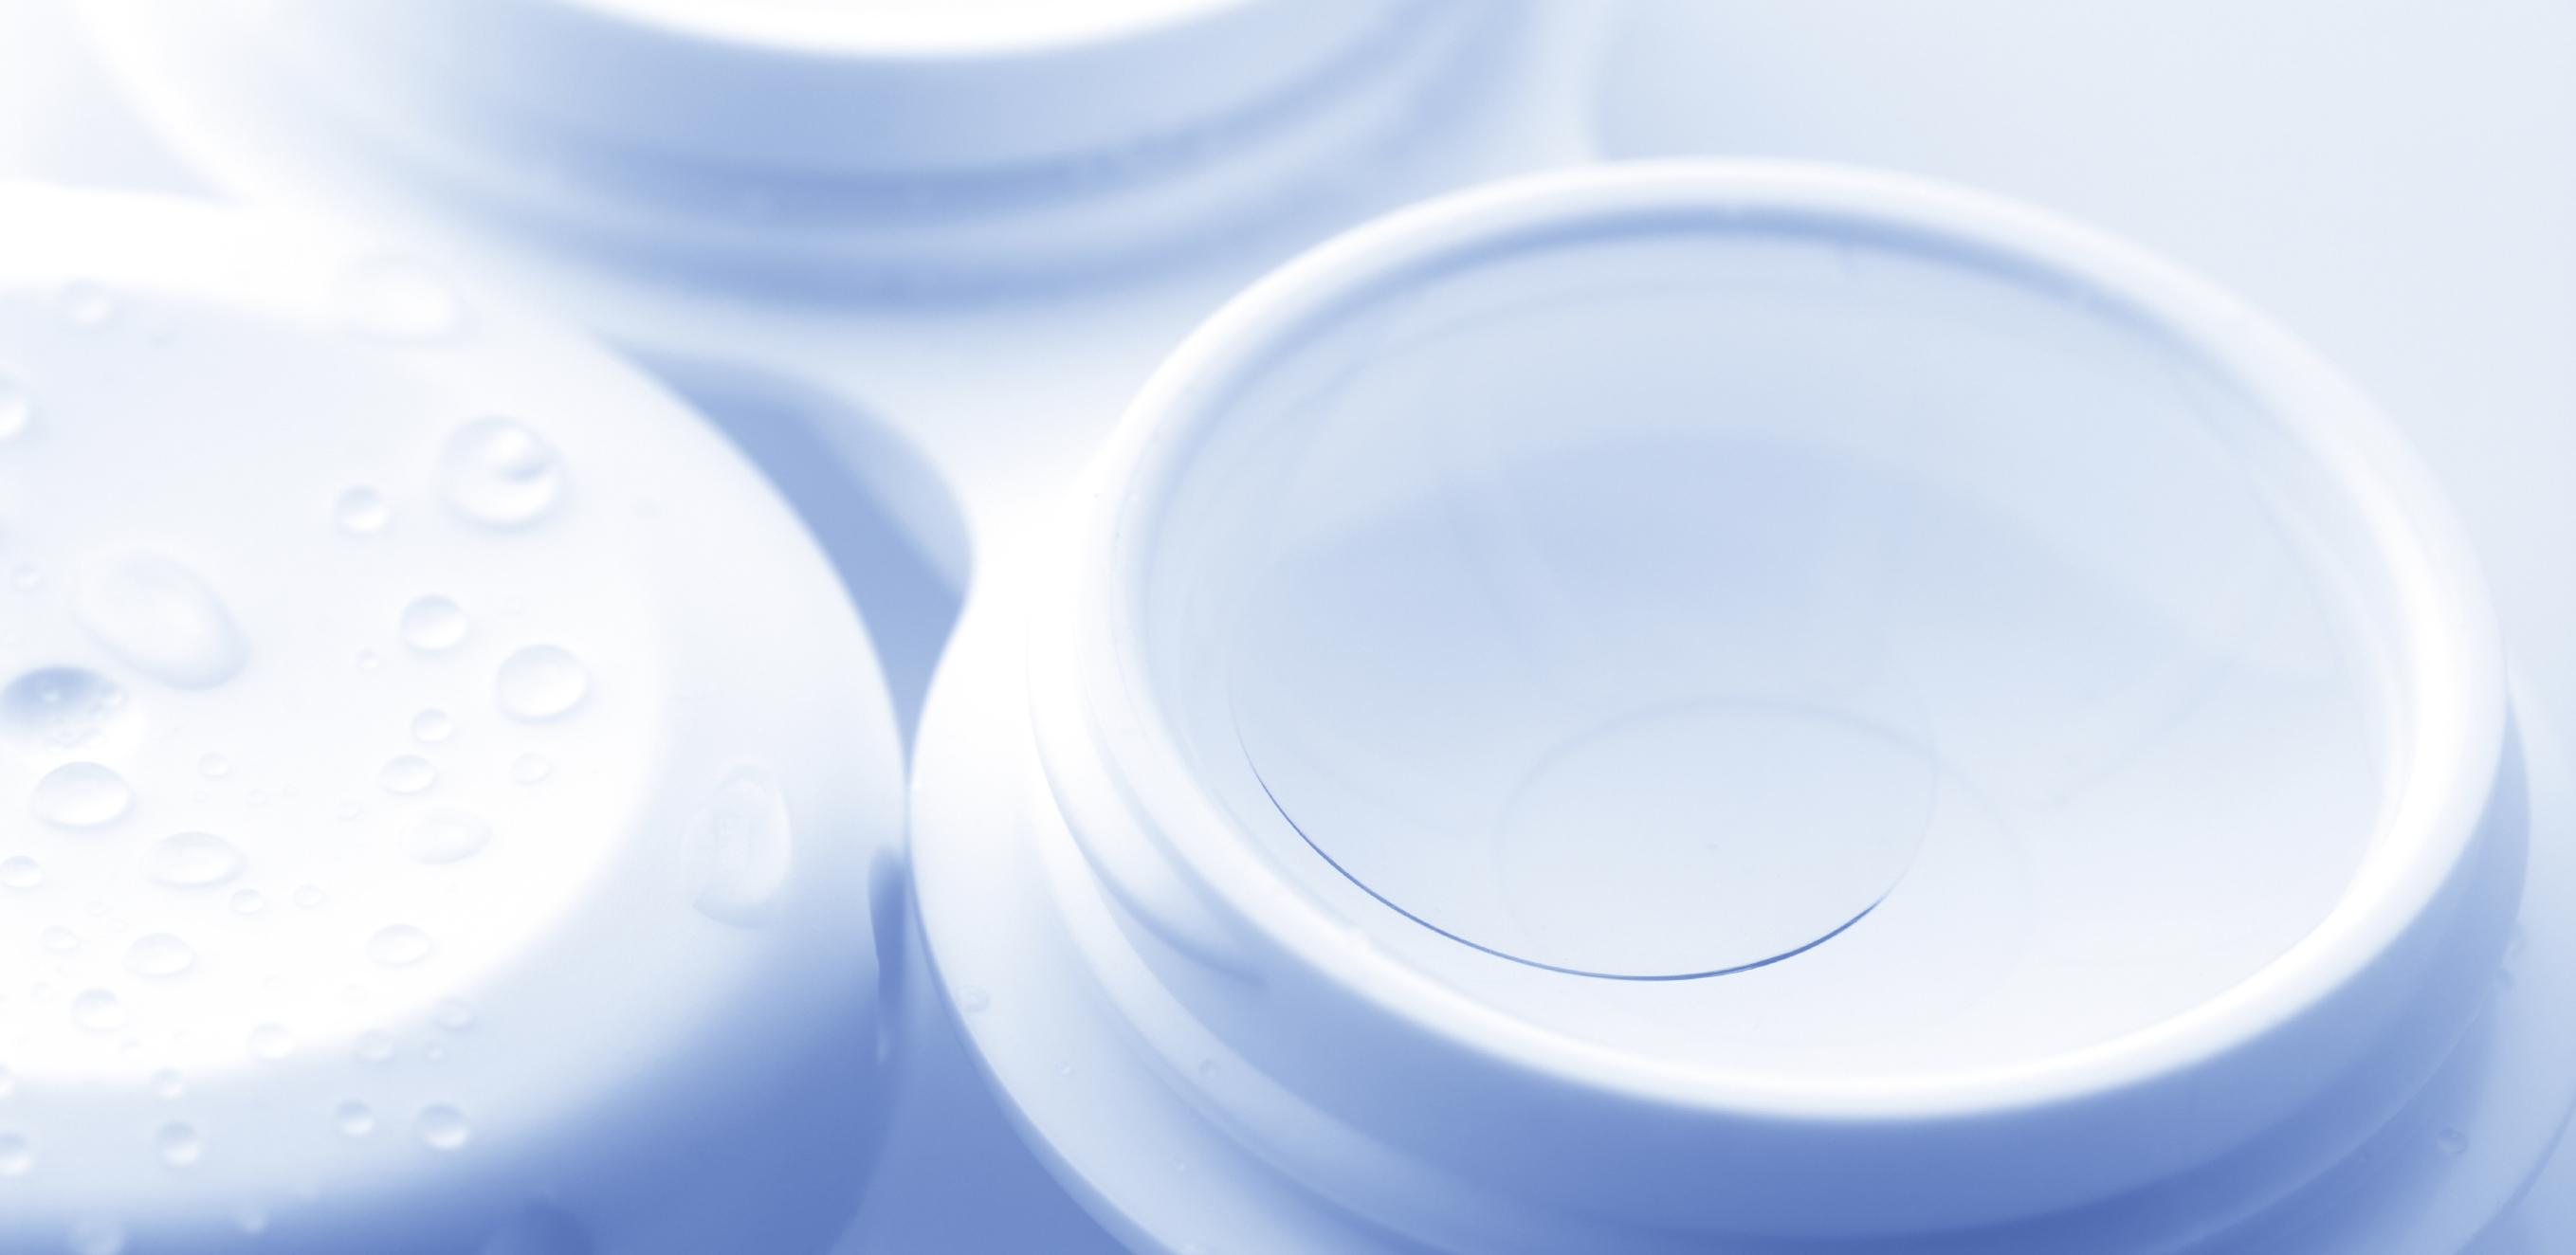 Wear & Care for Contact Lenses